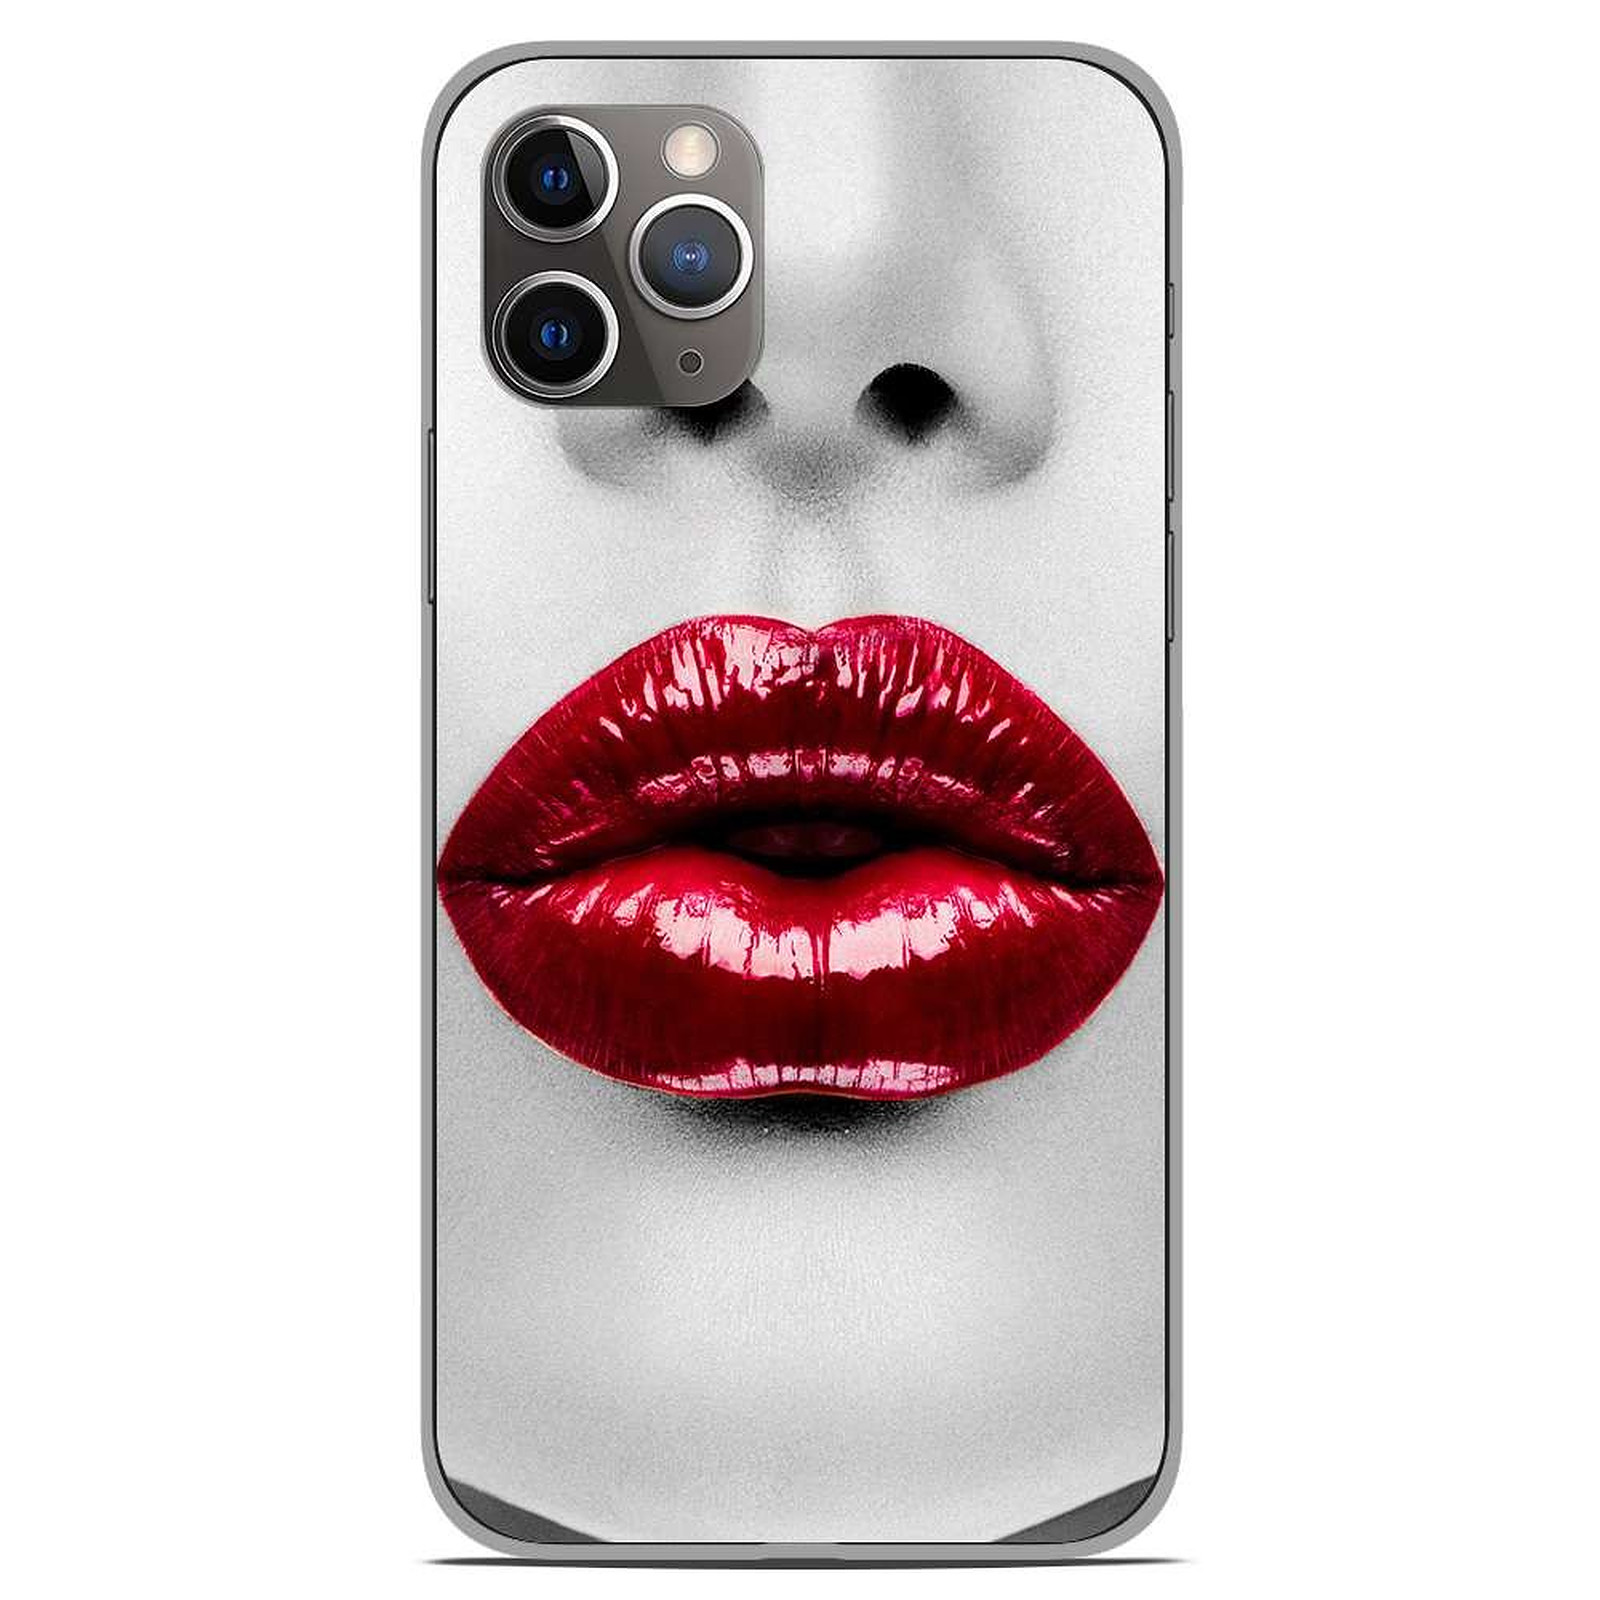 1001 Coques Coque silicone gel Apple iPhone 11 Pro motif Lèvres Rouges - Coque telephone 1001Coques